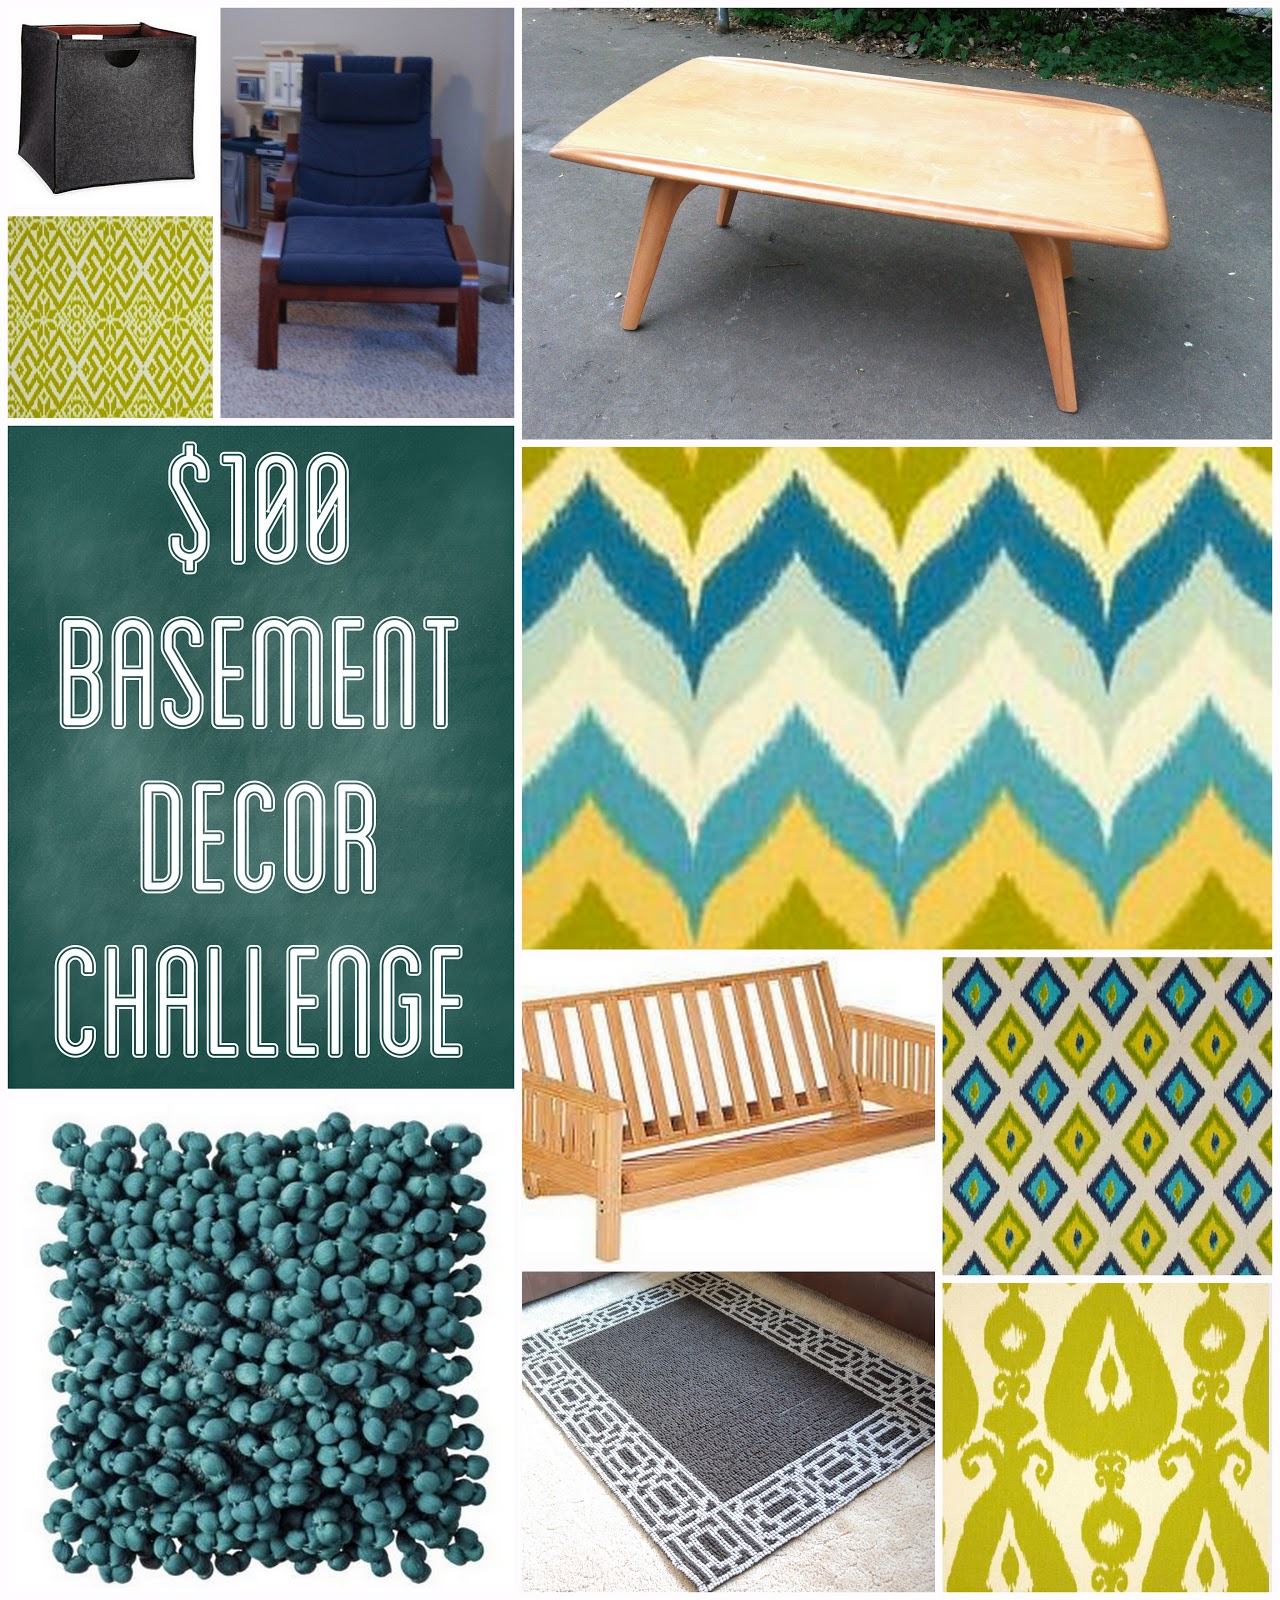 Decorating A Basement Apartment On A Budget